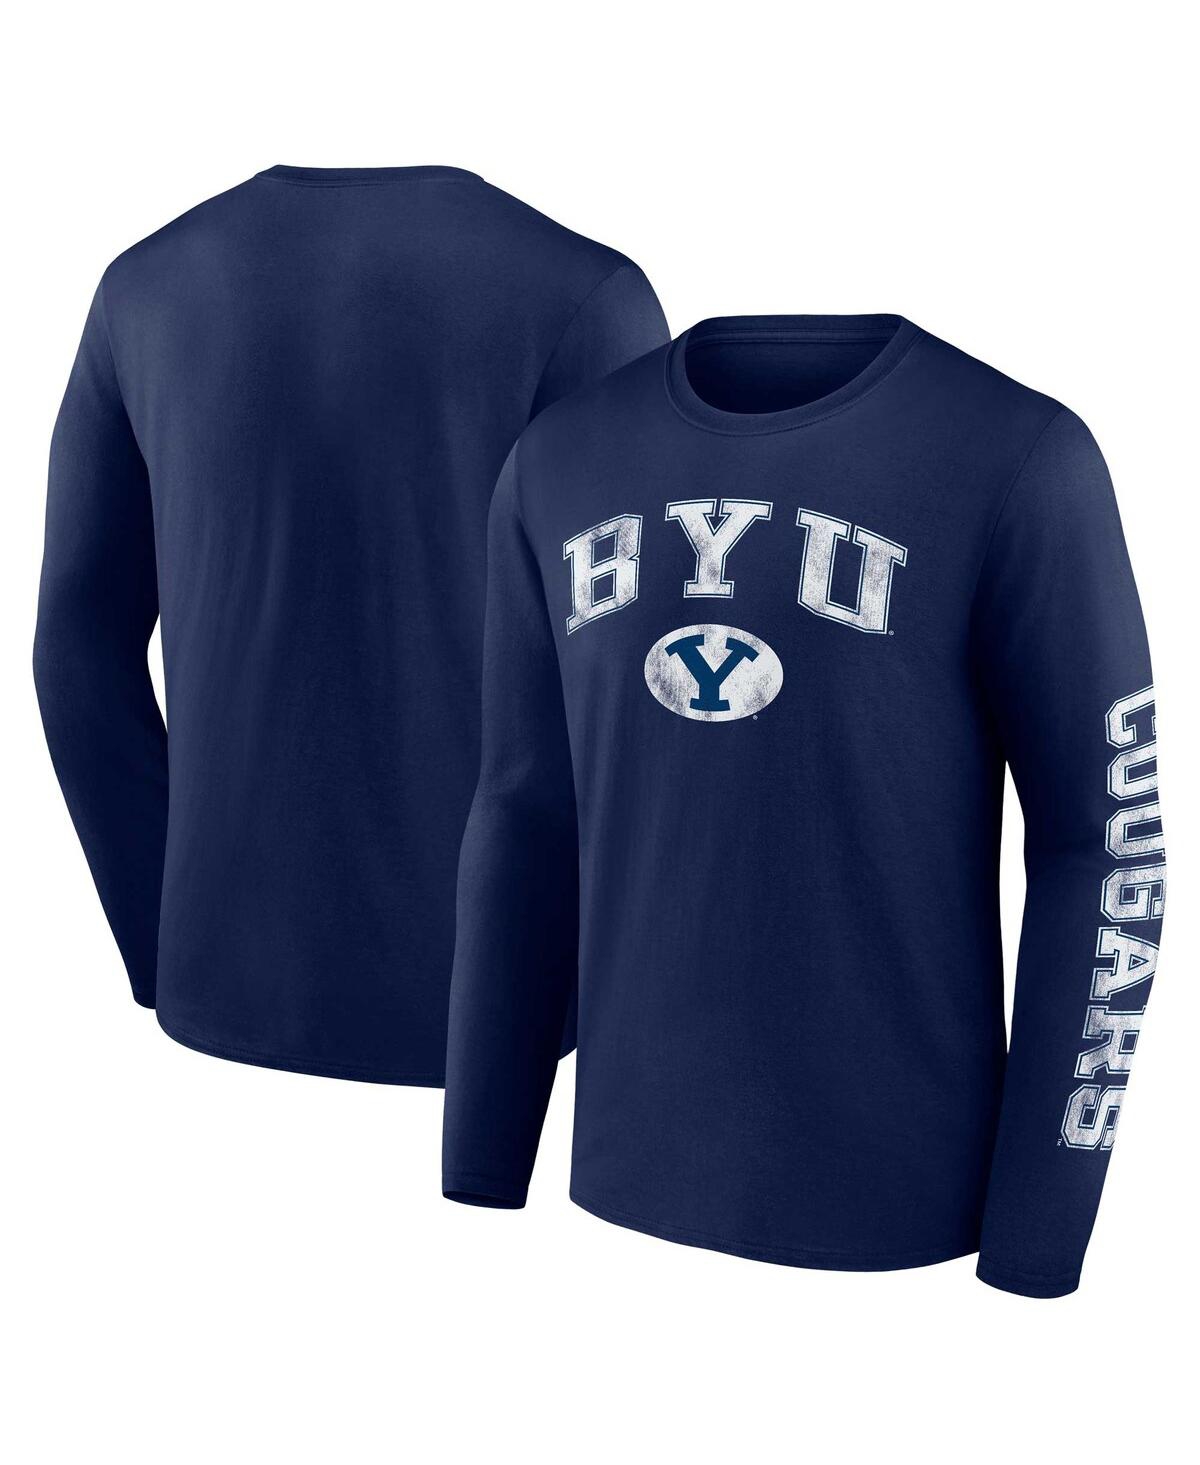 Fanatics Men's  Navy Byu Cougars Distressed Arch Over Logo Long Sleeve T-shirt